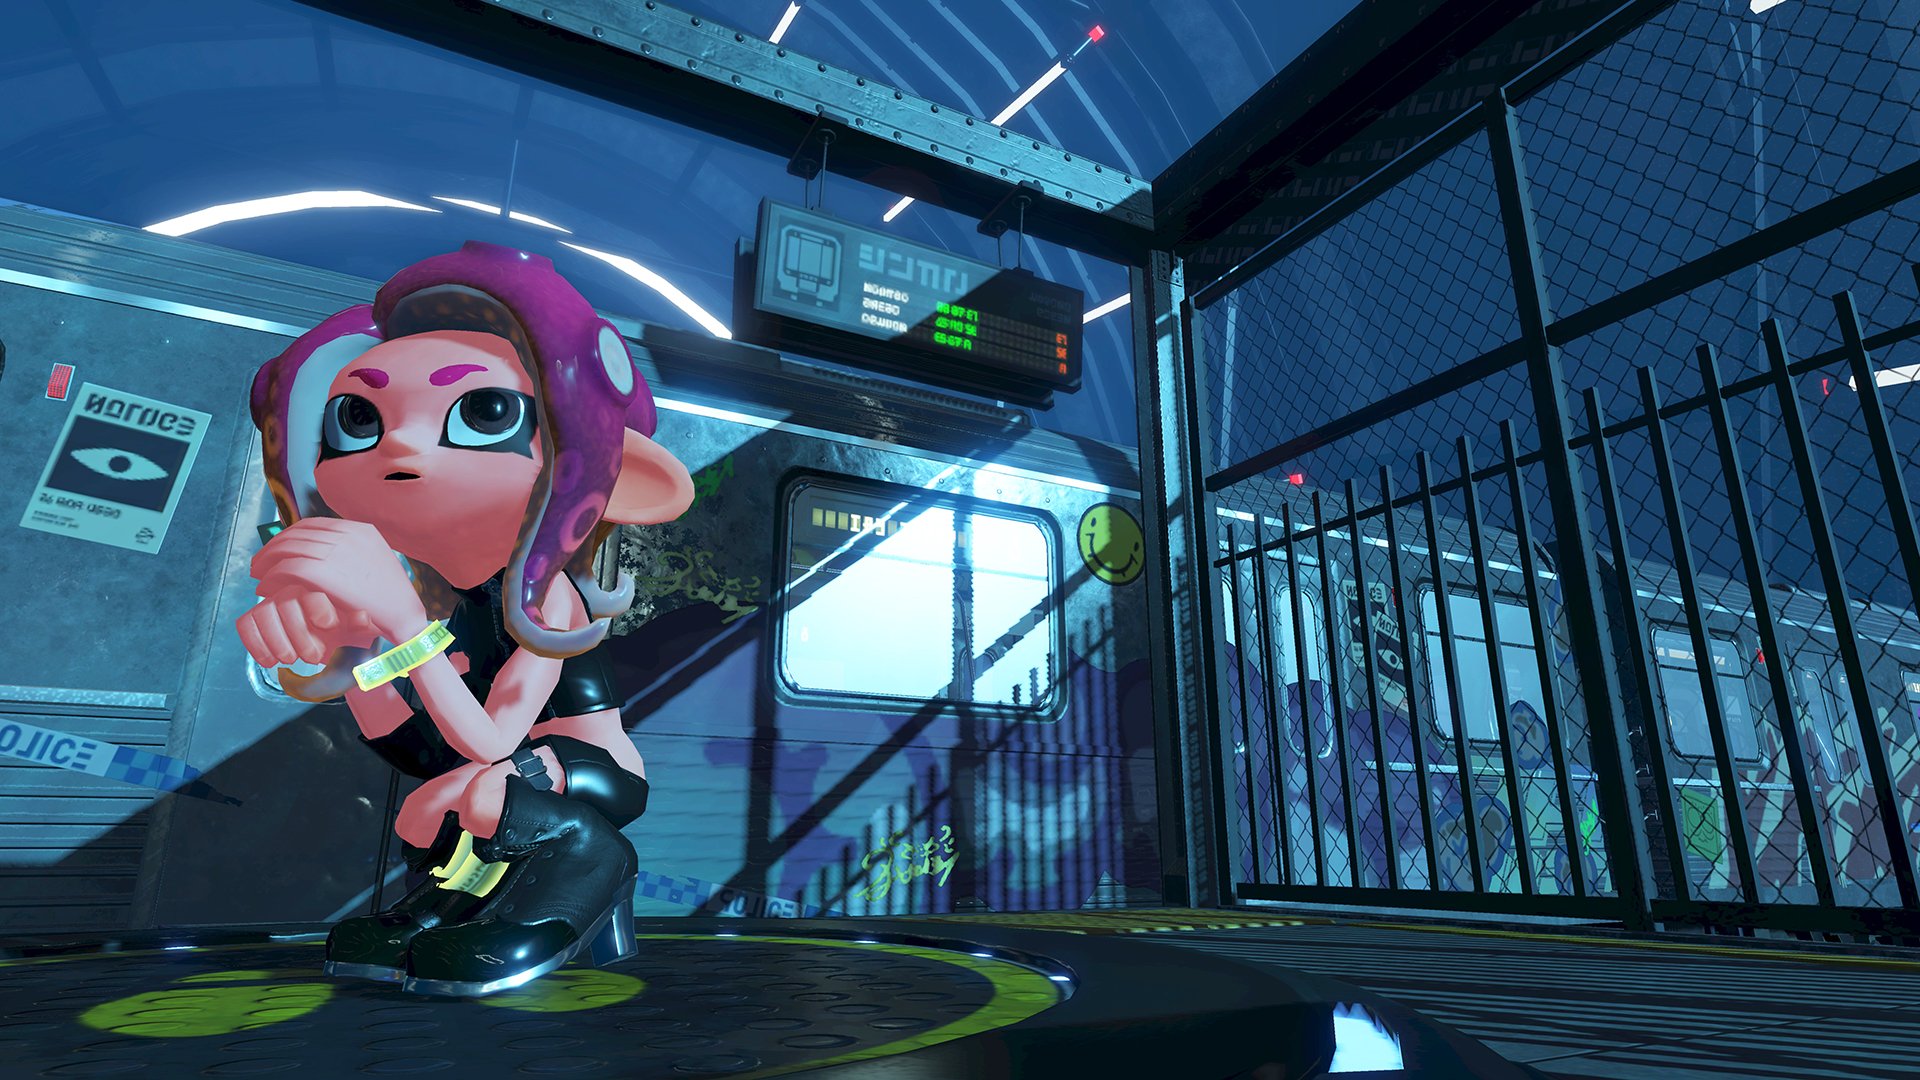 3.0.0 update for Splatoon 2 will launch in late April, and the Octo Expansi...